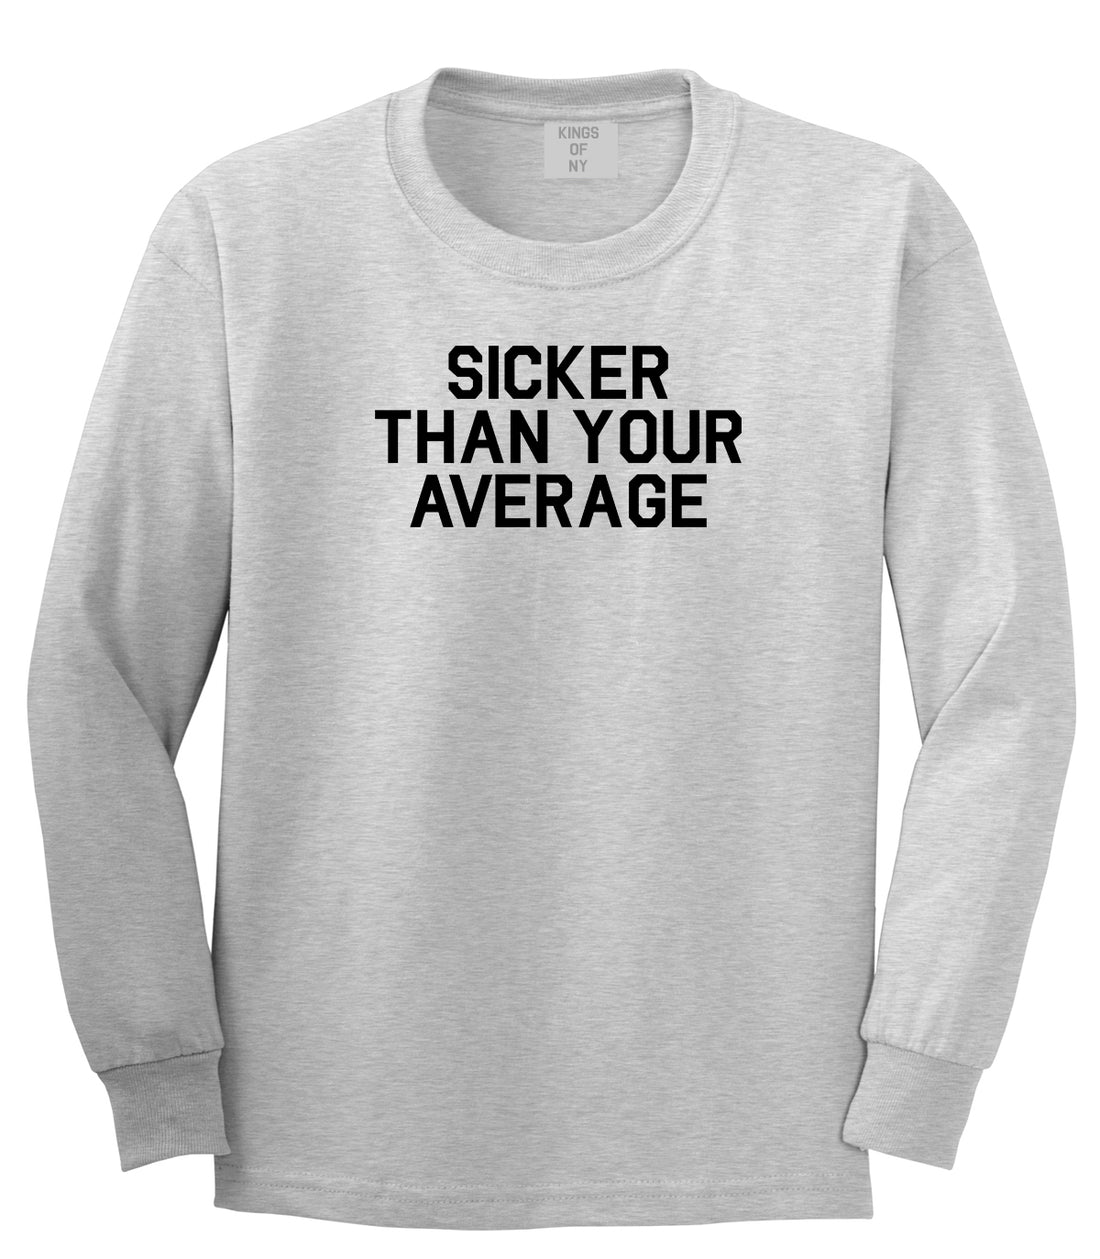 Sicker Than Your Average Long Sleeve T-Shirt in Grey